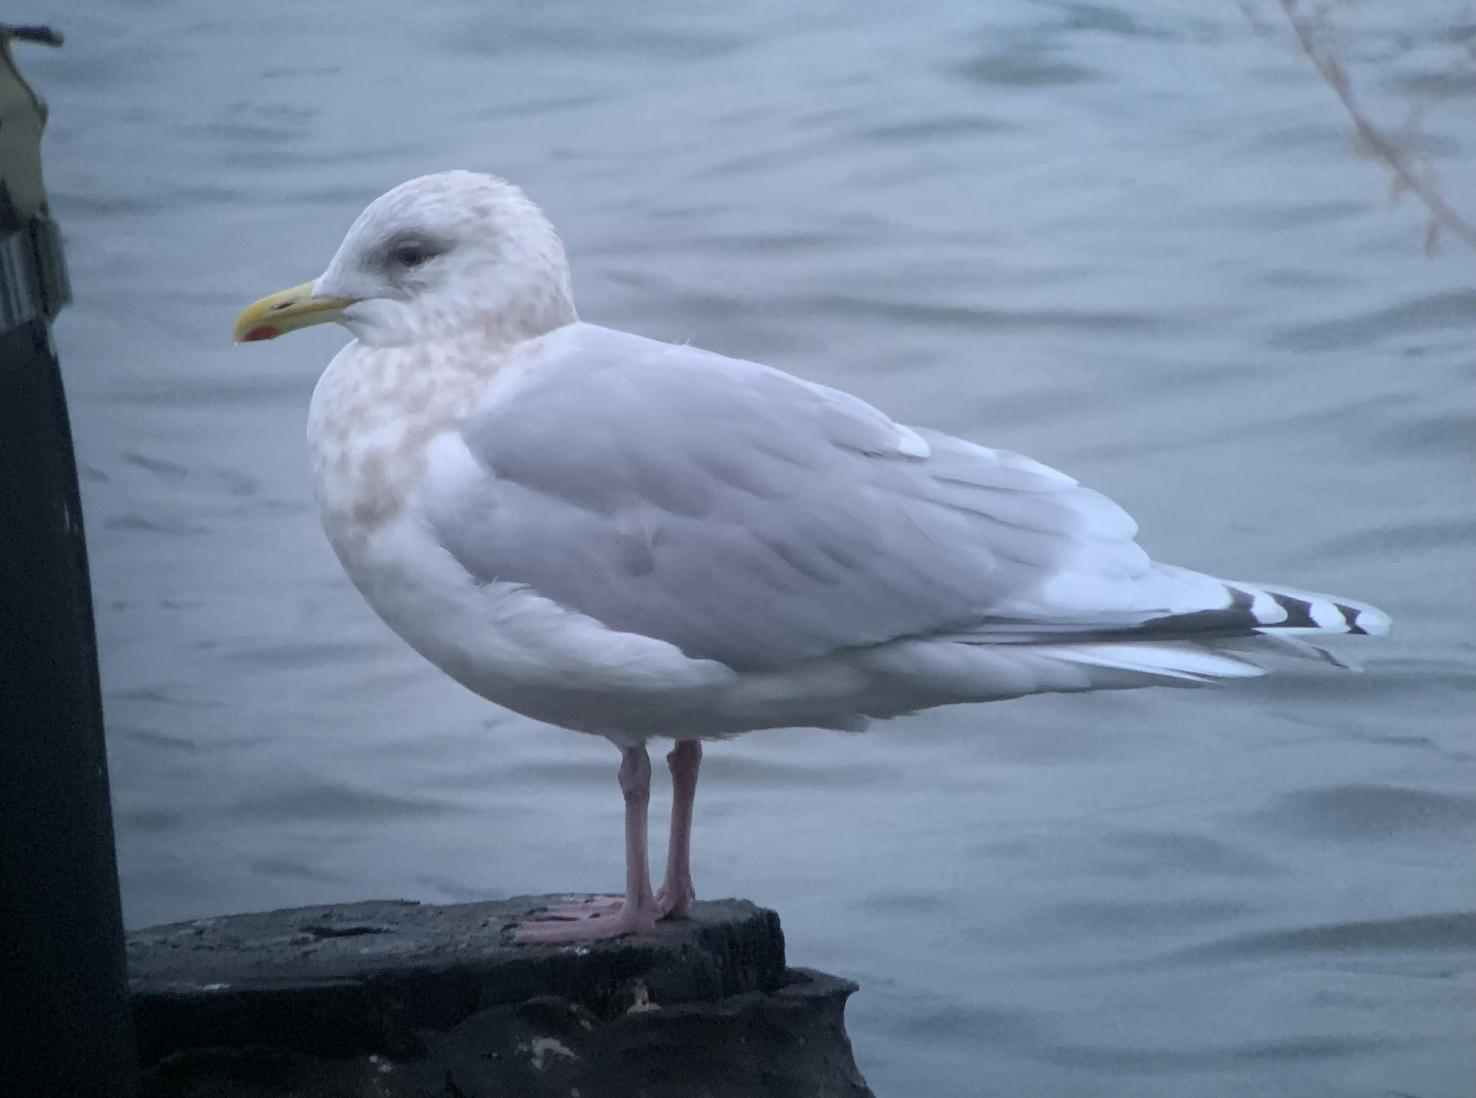 Iceland Gull on the Brooklyn Bridge Pilings (Photo by Mike Yuan)